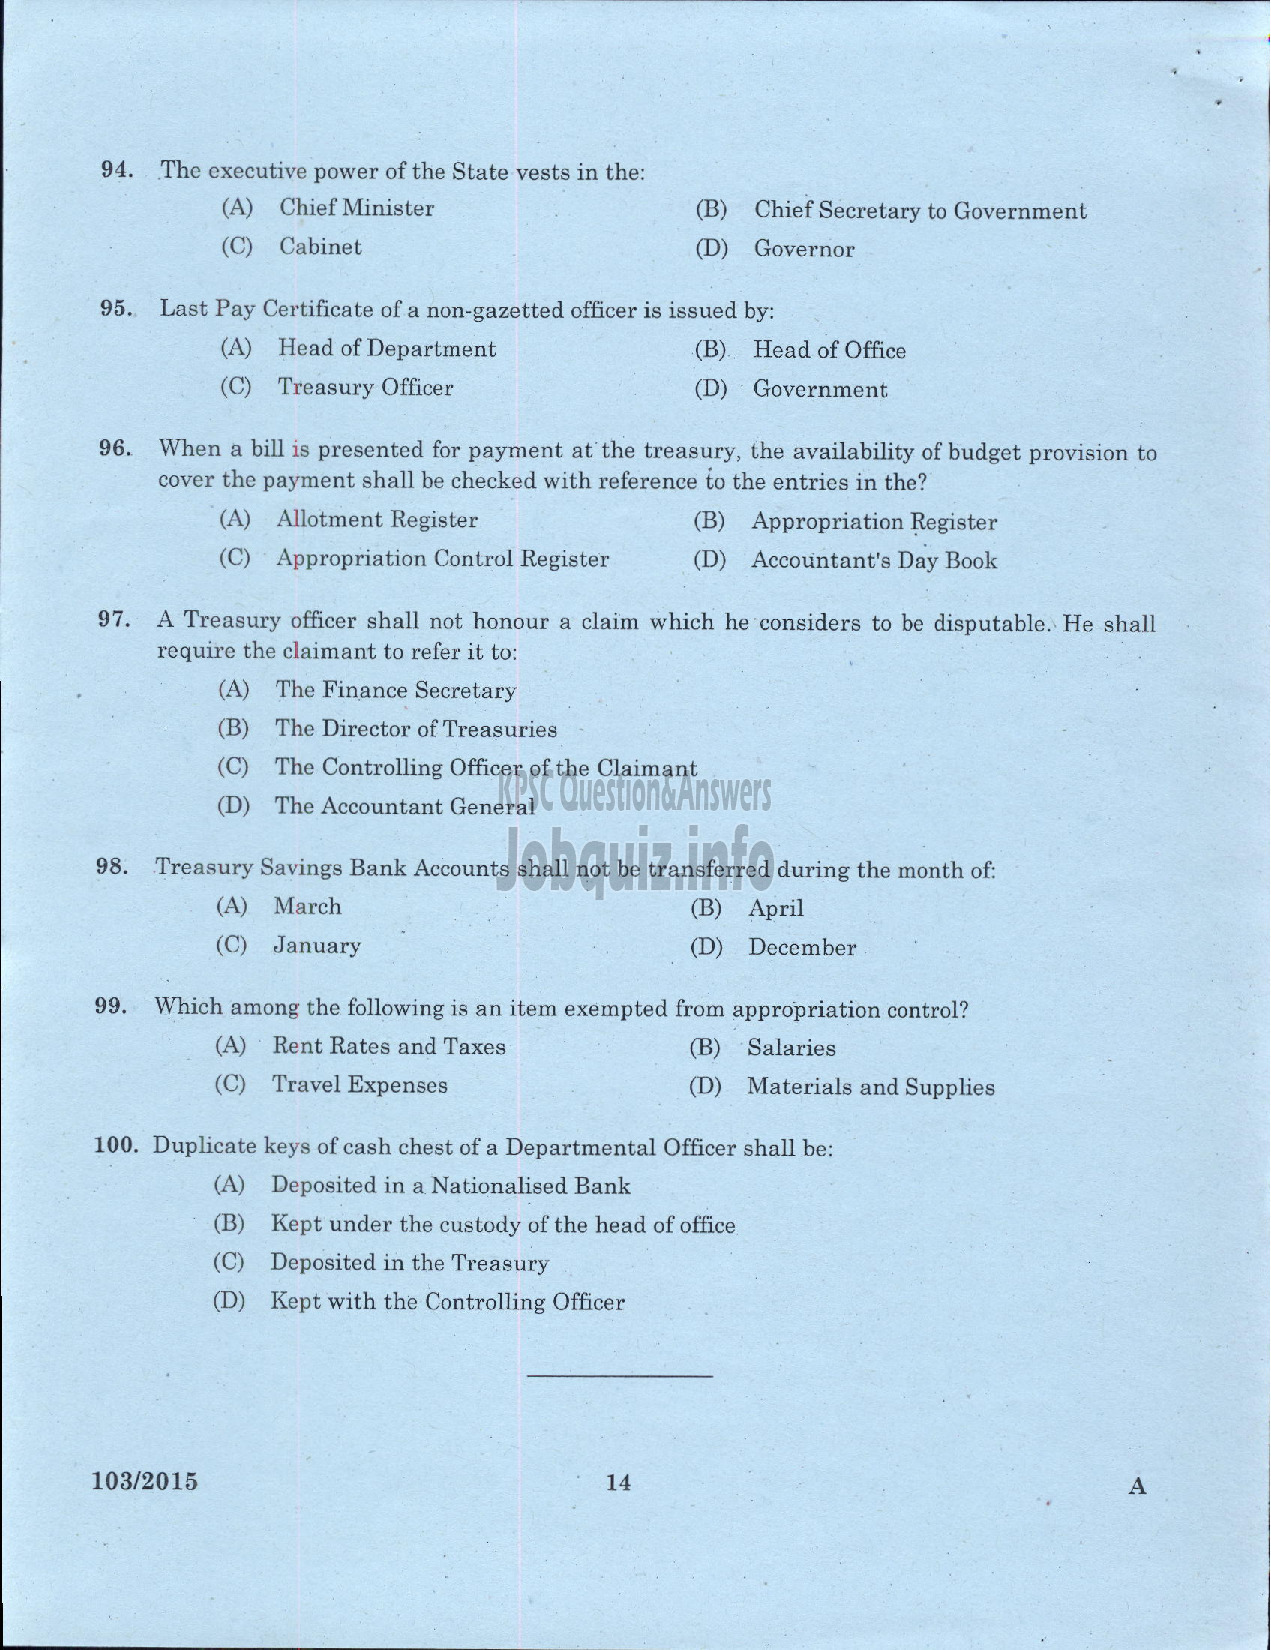 Kerala PSC Question Paper - ADMINISTRATIVE OFFICER BY TRANSFER INTERNAL KSRTC-12